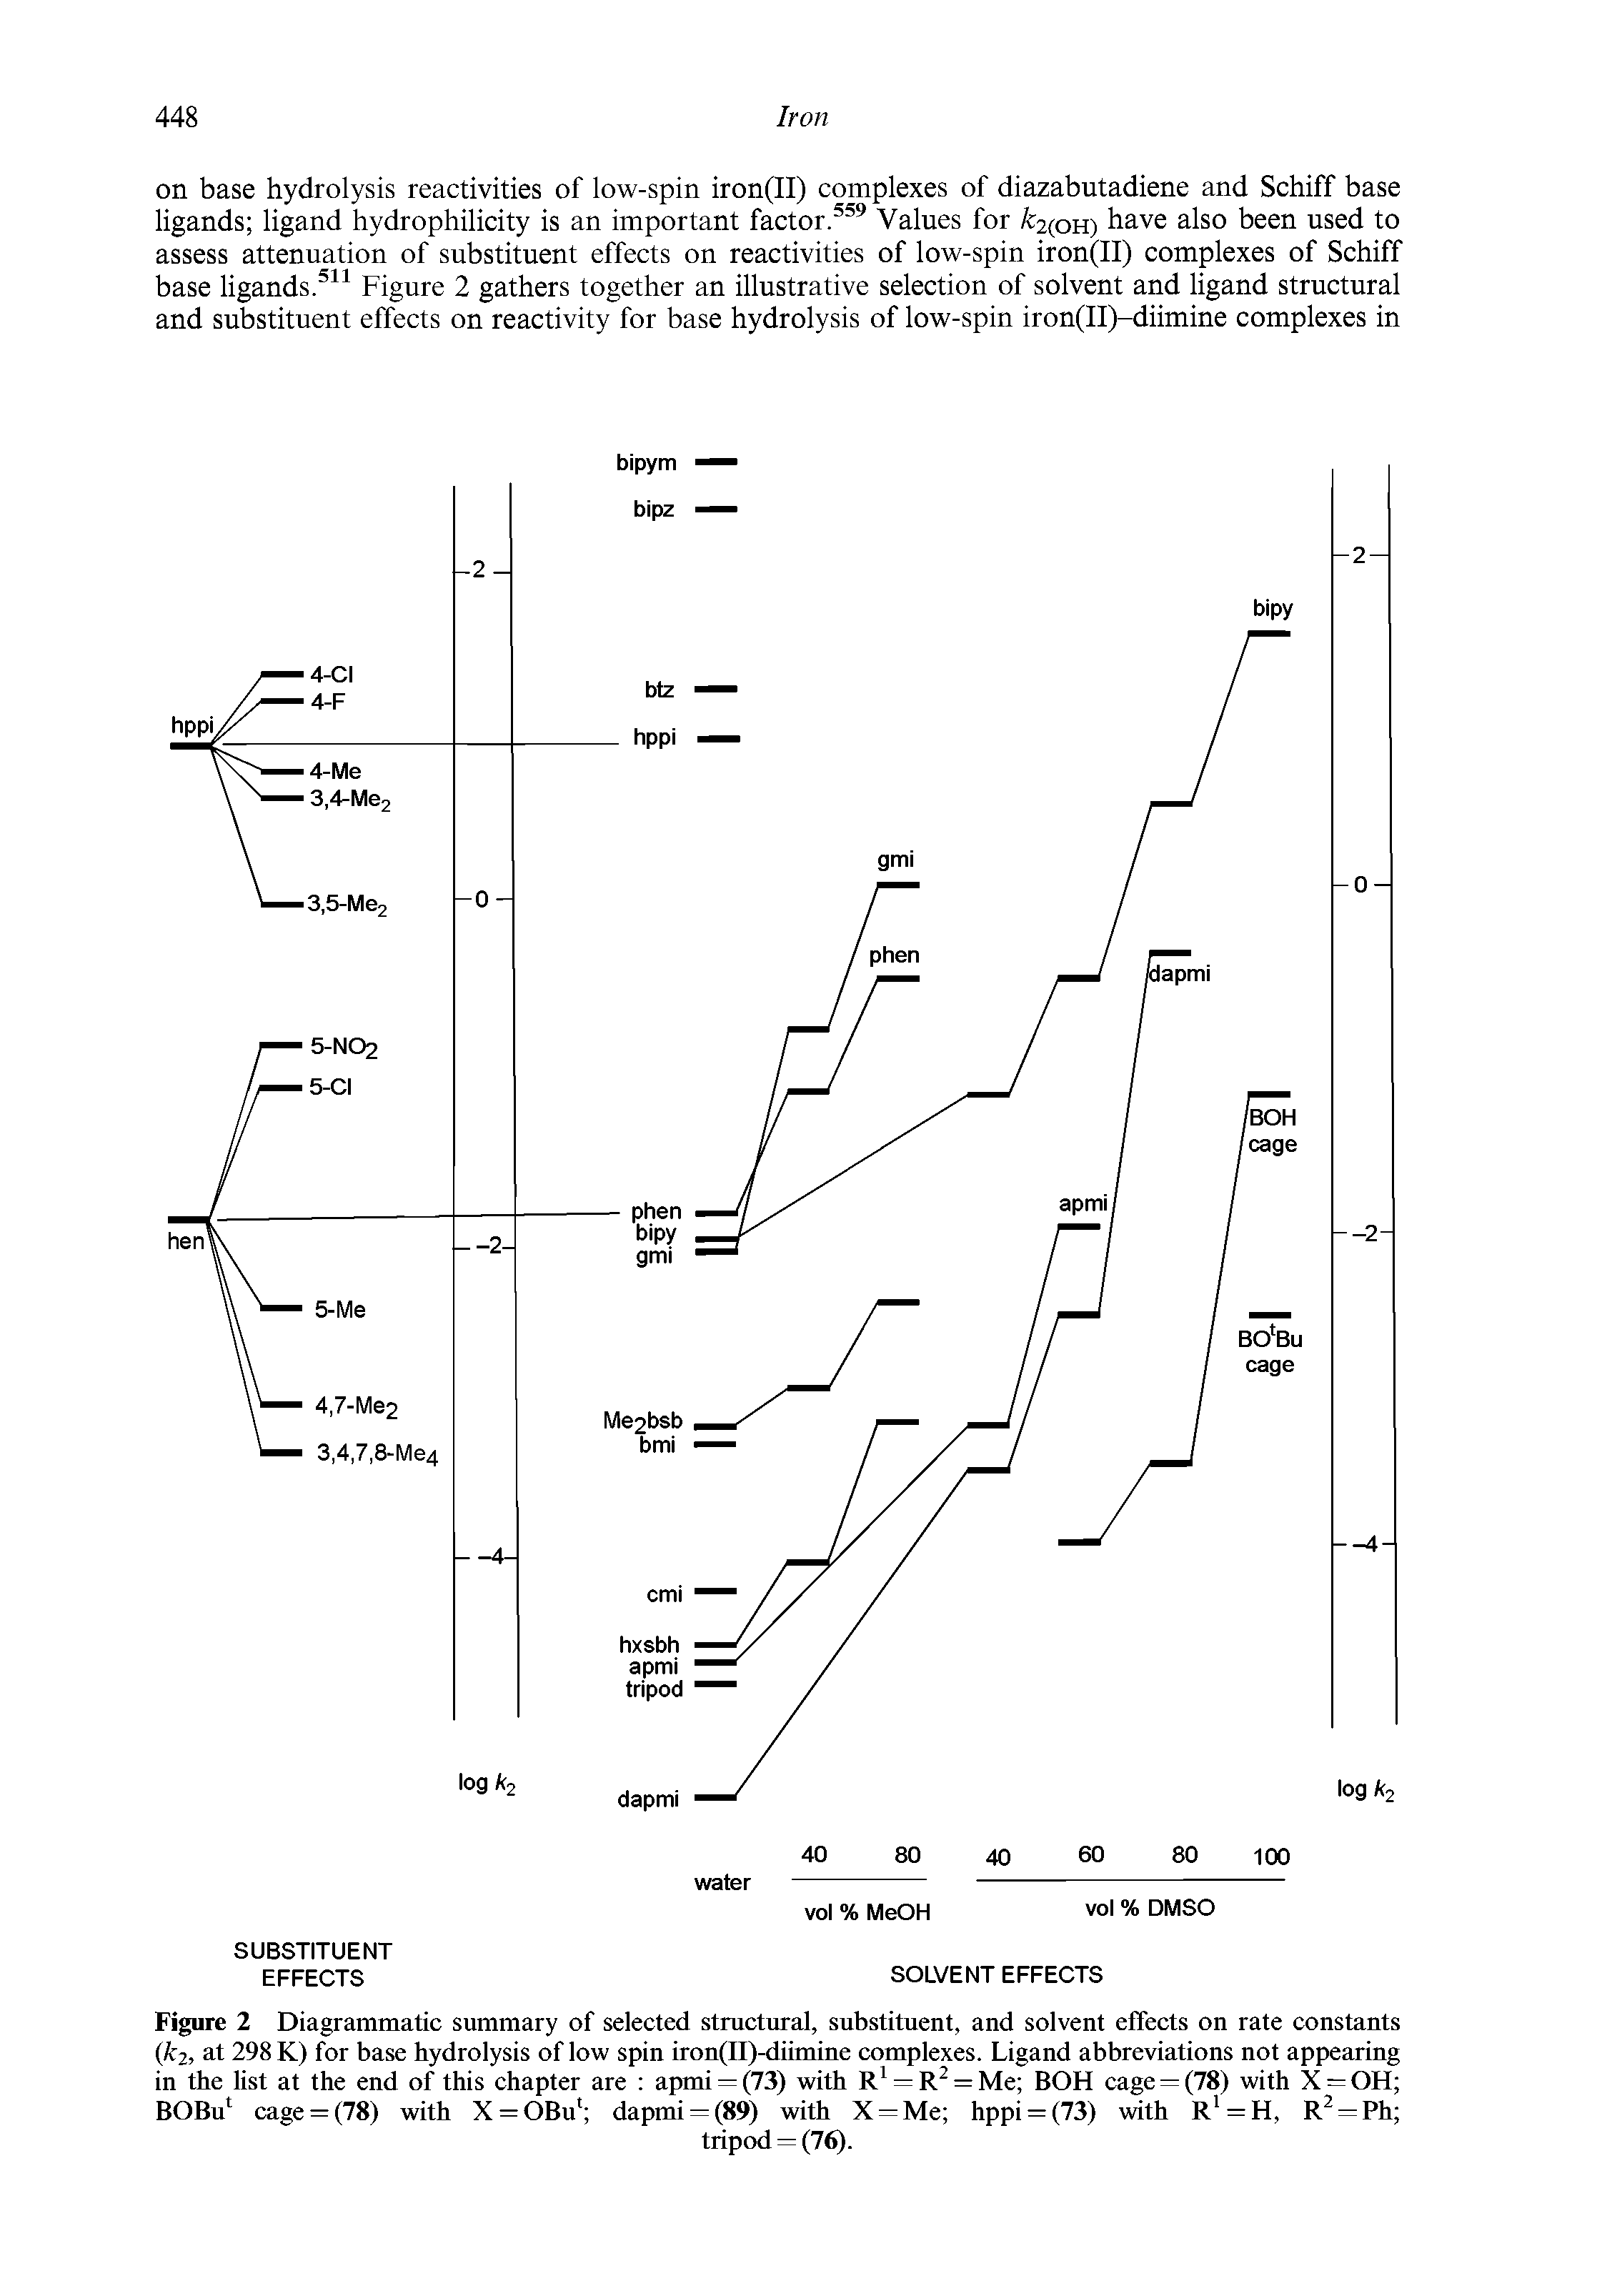 Figure 2 Diagrammatic summary of selected structural, substituent, and solvent effects on rate constants (kj, at 298 K) for base hydrolysis of low spin iron(II)-diimine complexes. Ligand abbreviations not appearing in the list at the end of this chapter are apmi = (73) with = Me BOH cage = (78) with X = OH ...